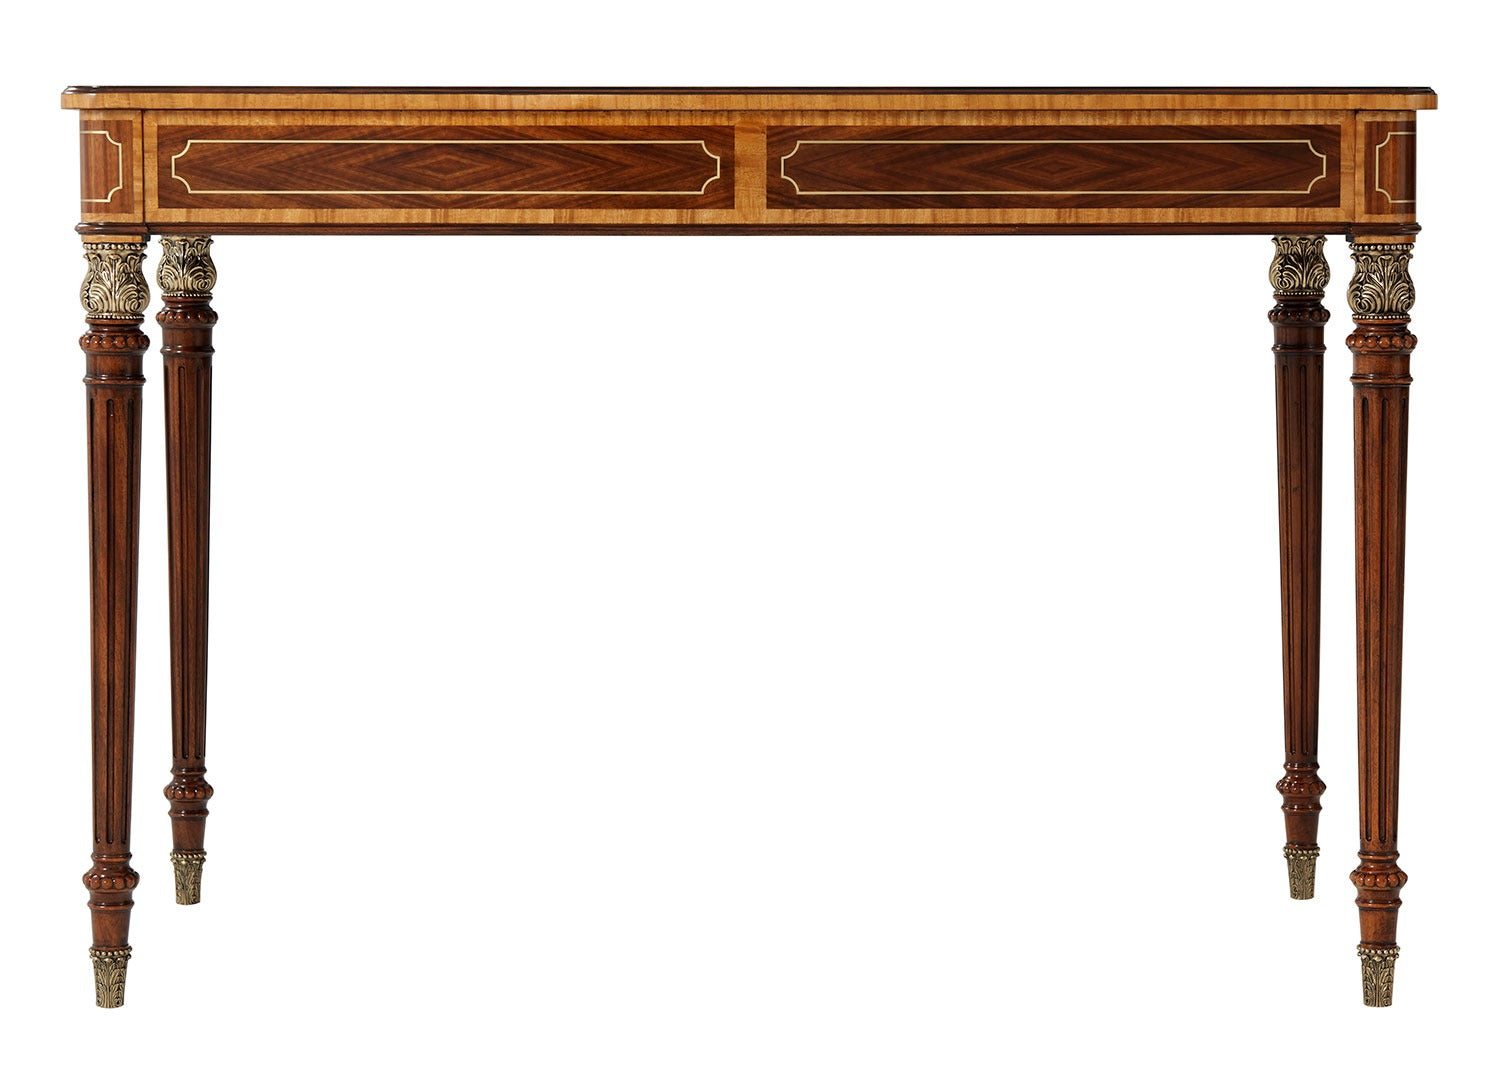 Floral Inlaid Mahogany Desk or Writing Table